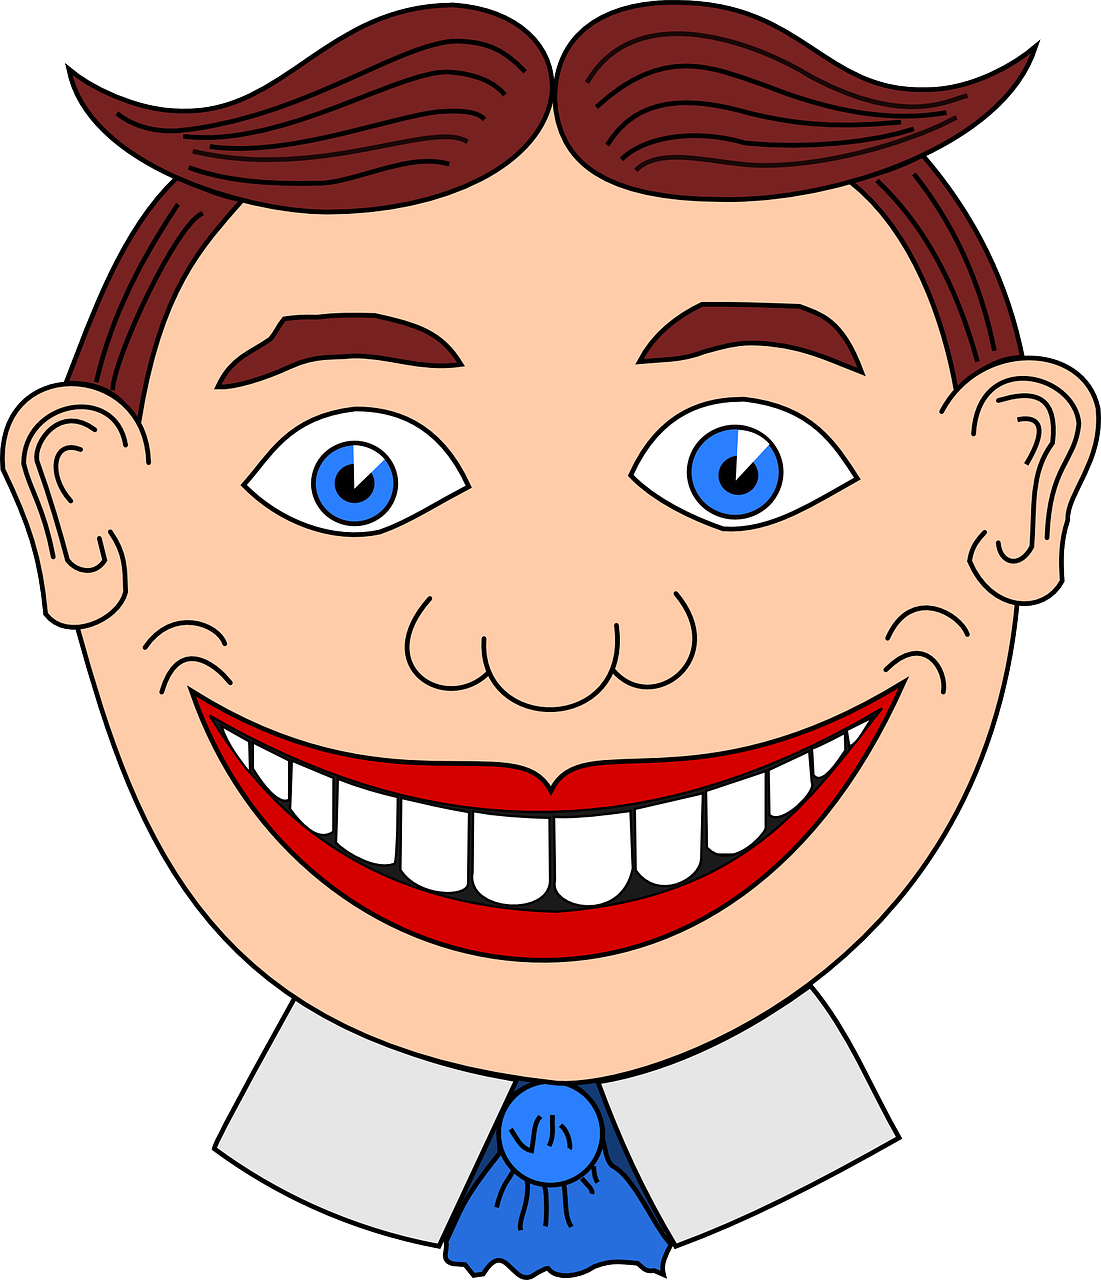 person,mouth,funny,big,smiling,laugh,laughing,portrait,free vector graphics,free pictures, free photos, free images, royalty free, free illustrations, public domain